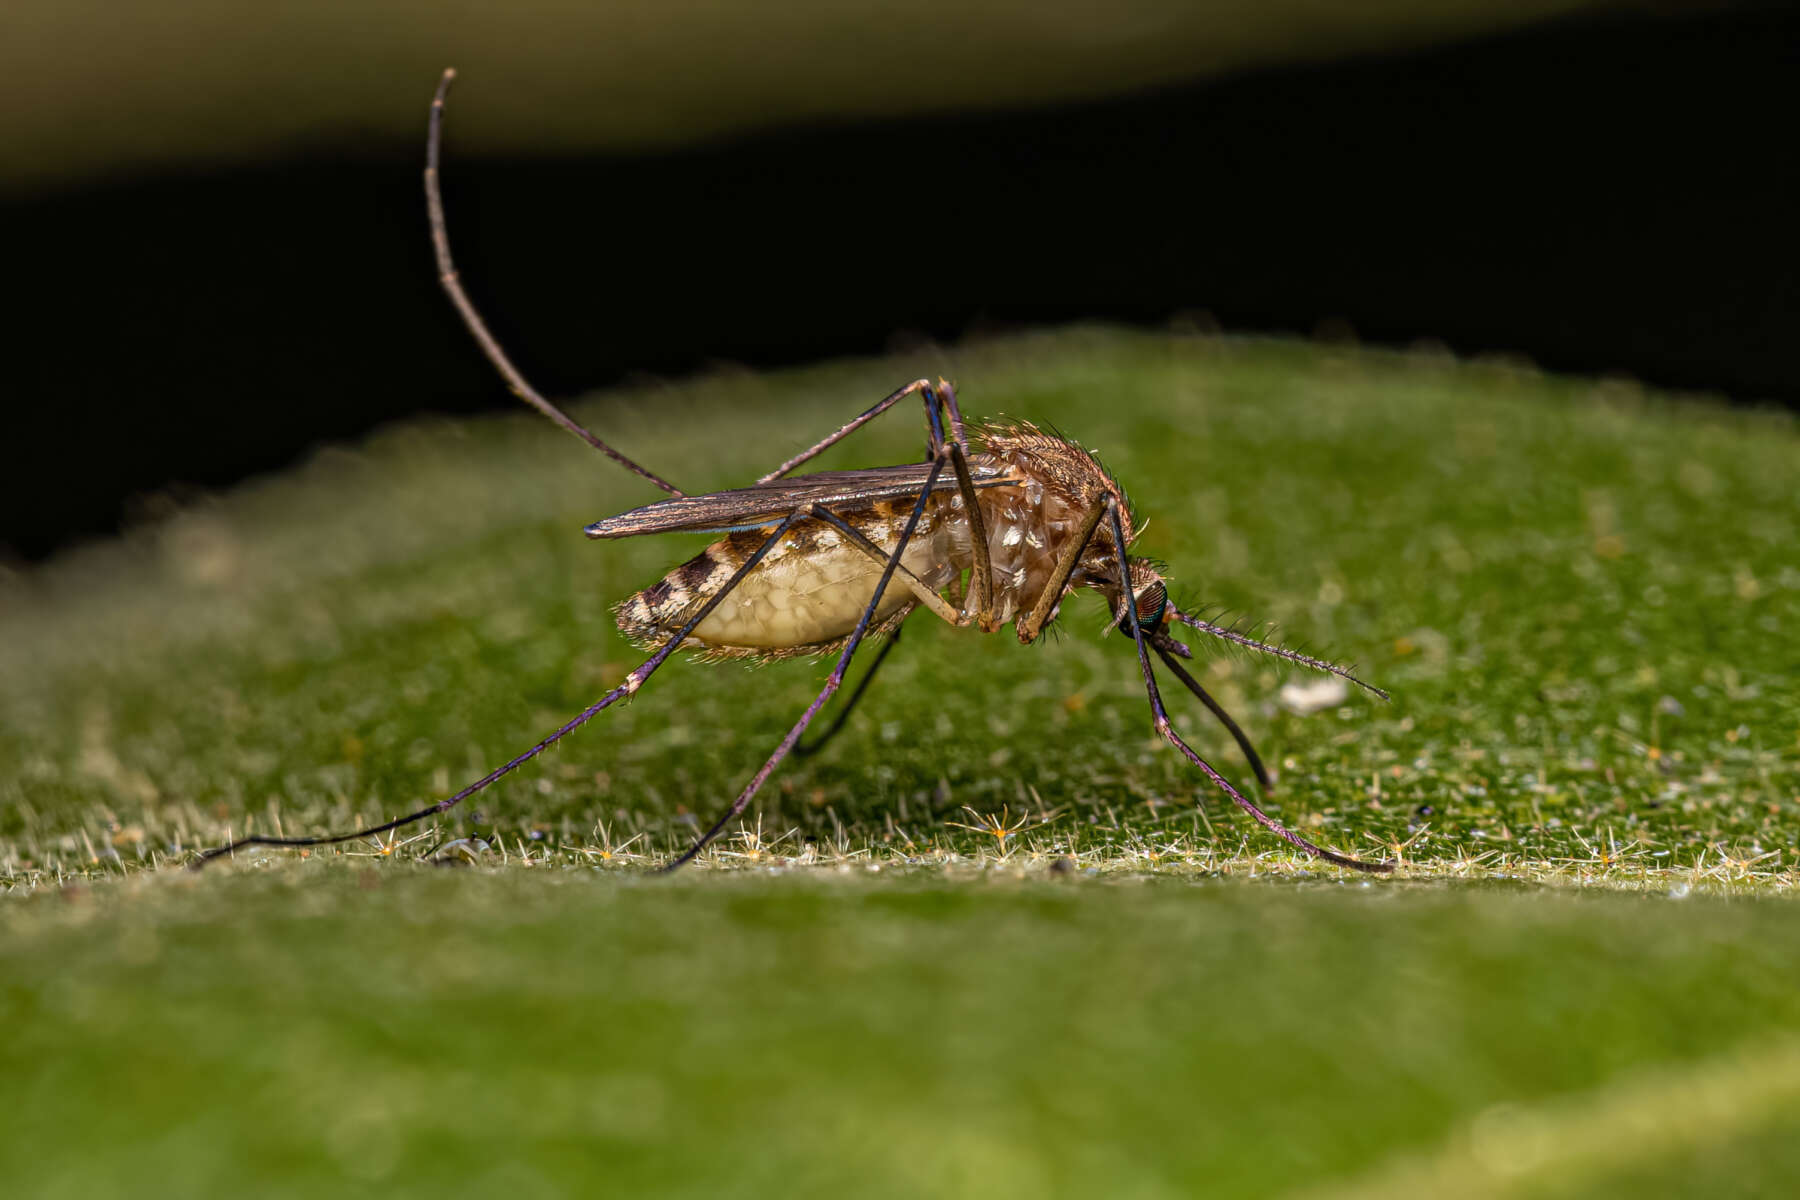 Image of an Adult Female Southern House Mosquito Insect